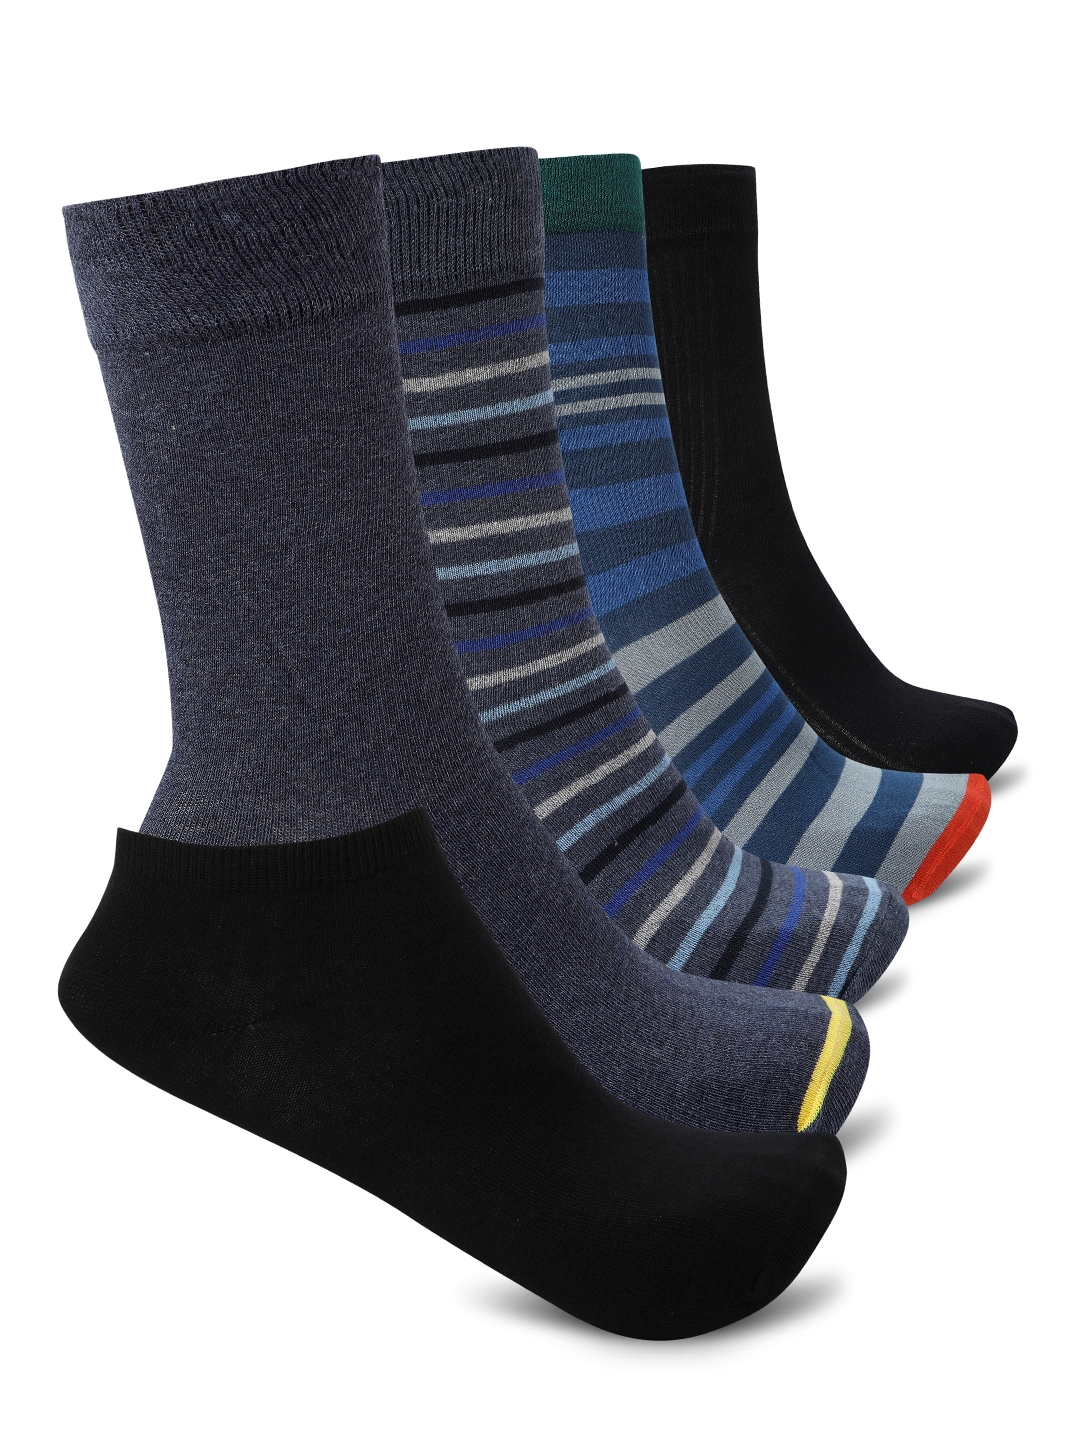 Smarty Pants | Smarty Pants men's pack of 5 solid and printed cotton socks.  0